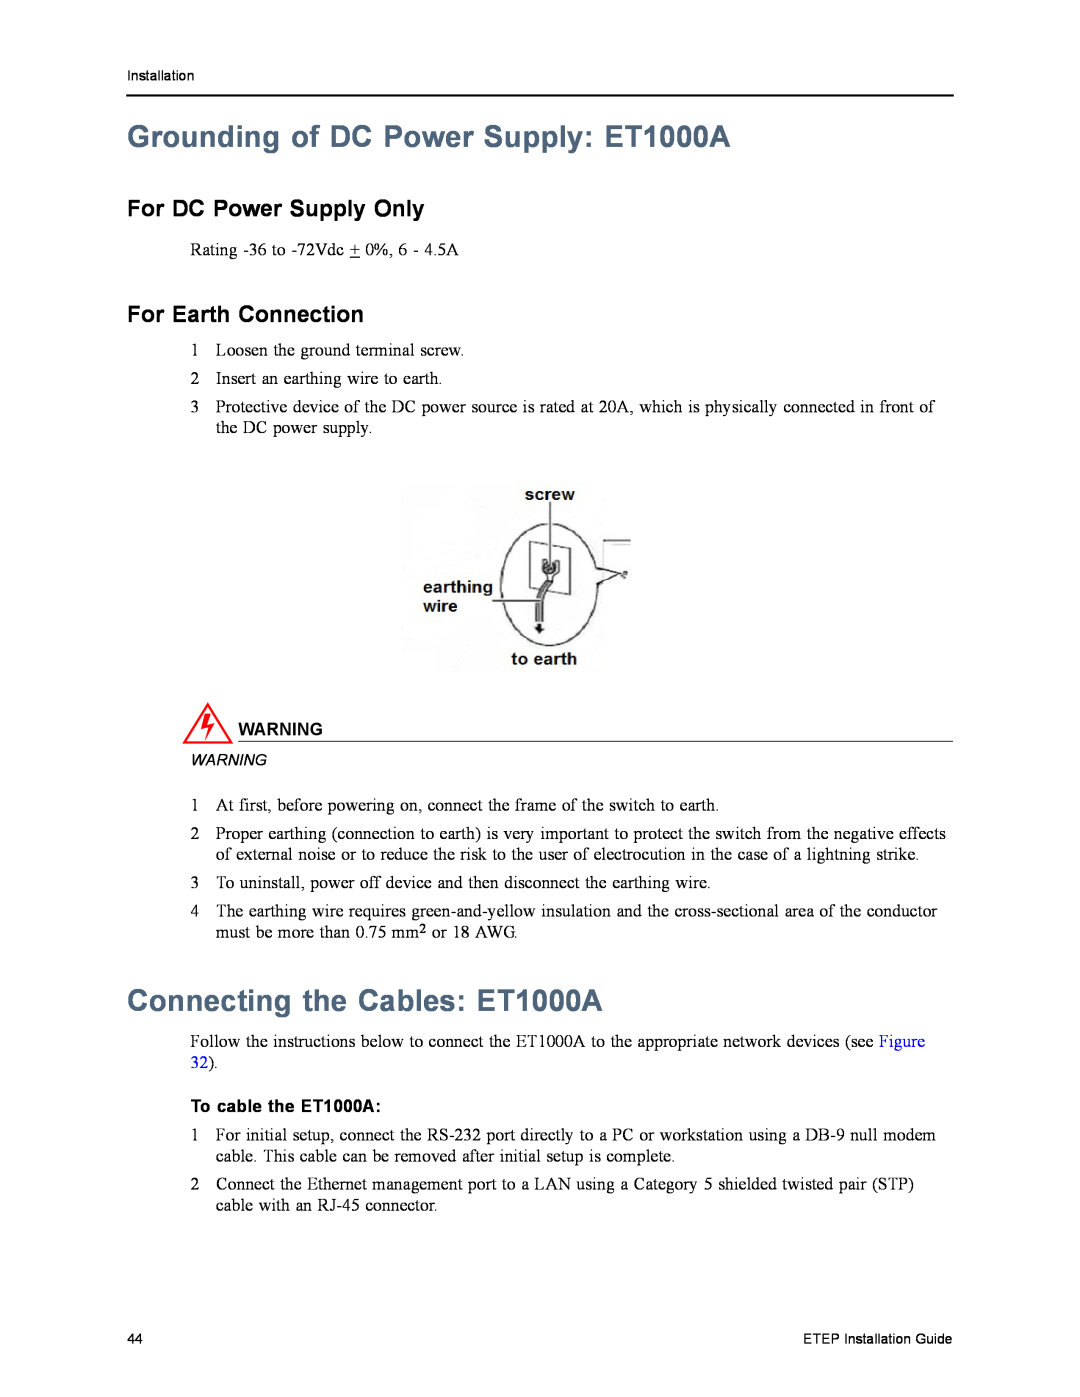 Black Box EncrypTight Enforcement Point (ETEP) manual Grounding of DC Power Supply ET1000A, Connecting the Cables ET1000A 